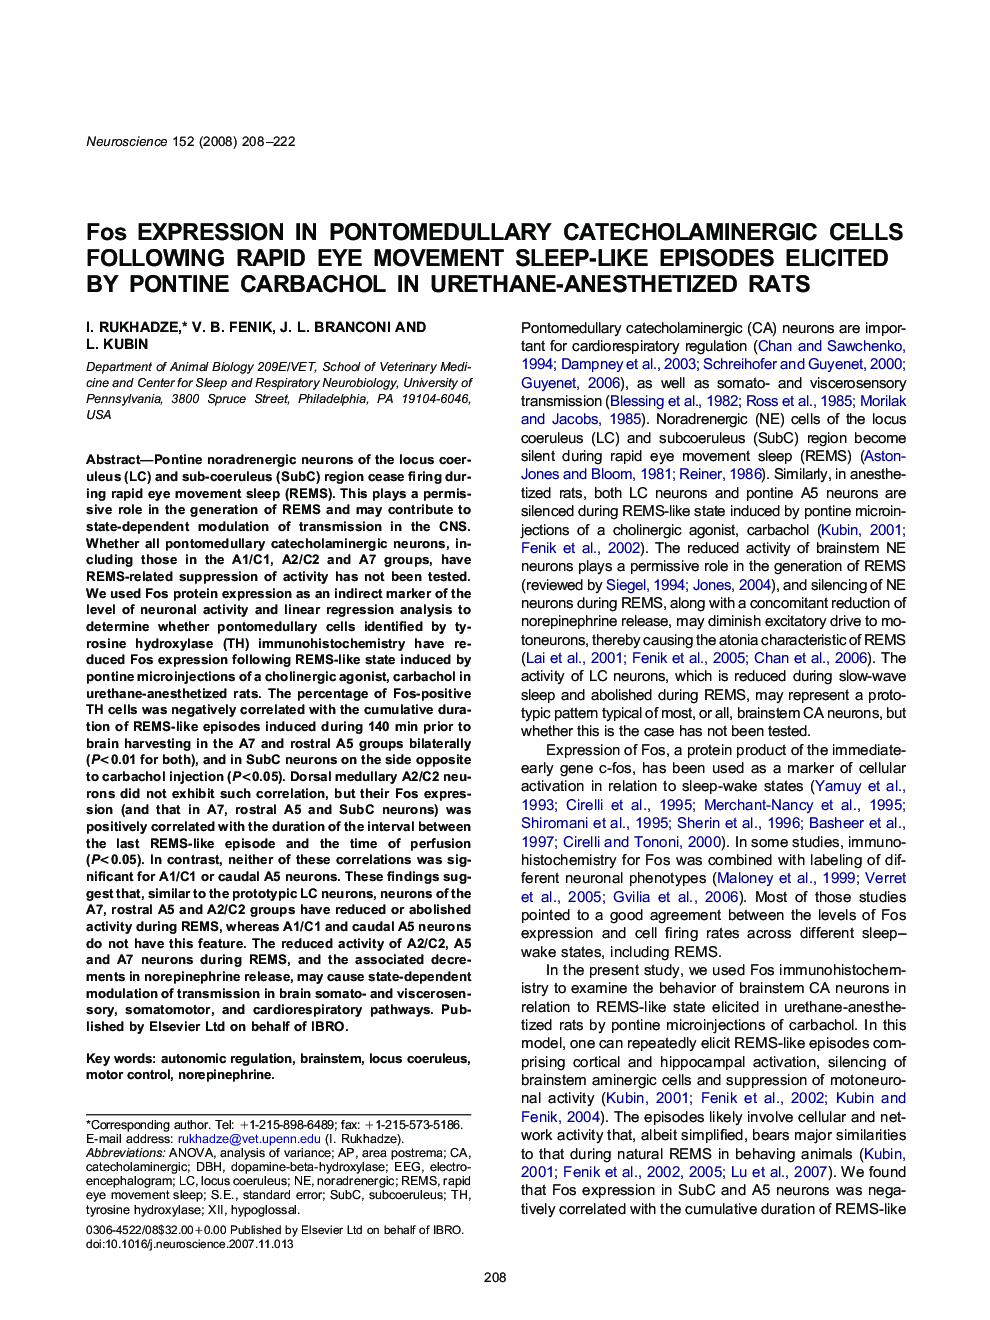 Fos expression in pontomedullary catecholaminergic cells following rapid eye movement sleep-like episodes elicited by pontine carbachol in urethane-anesthetized rats